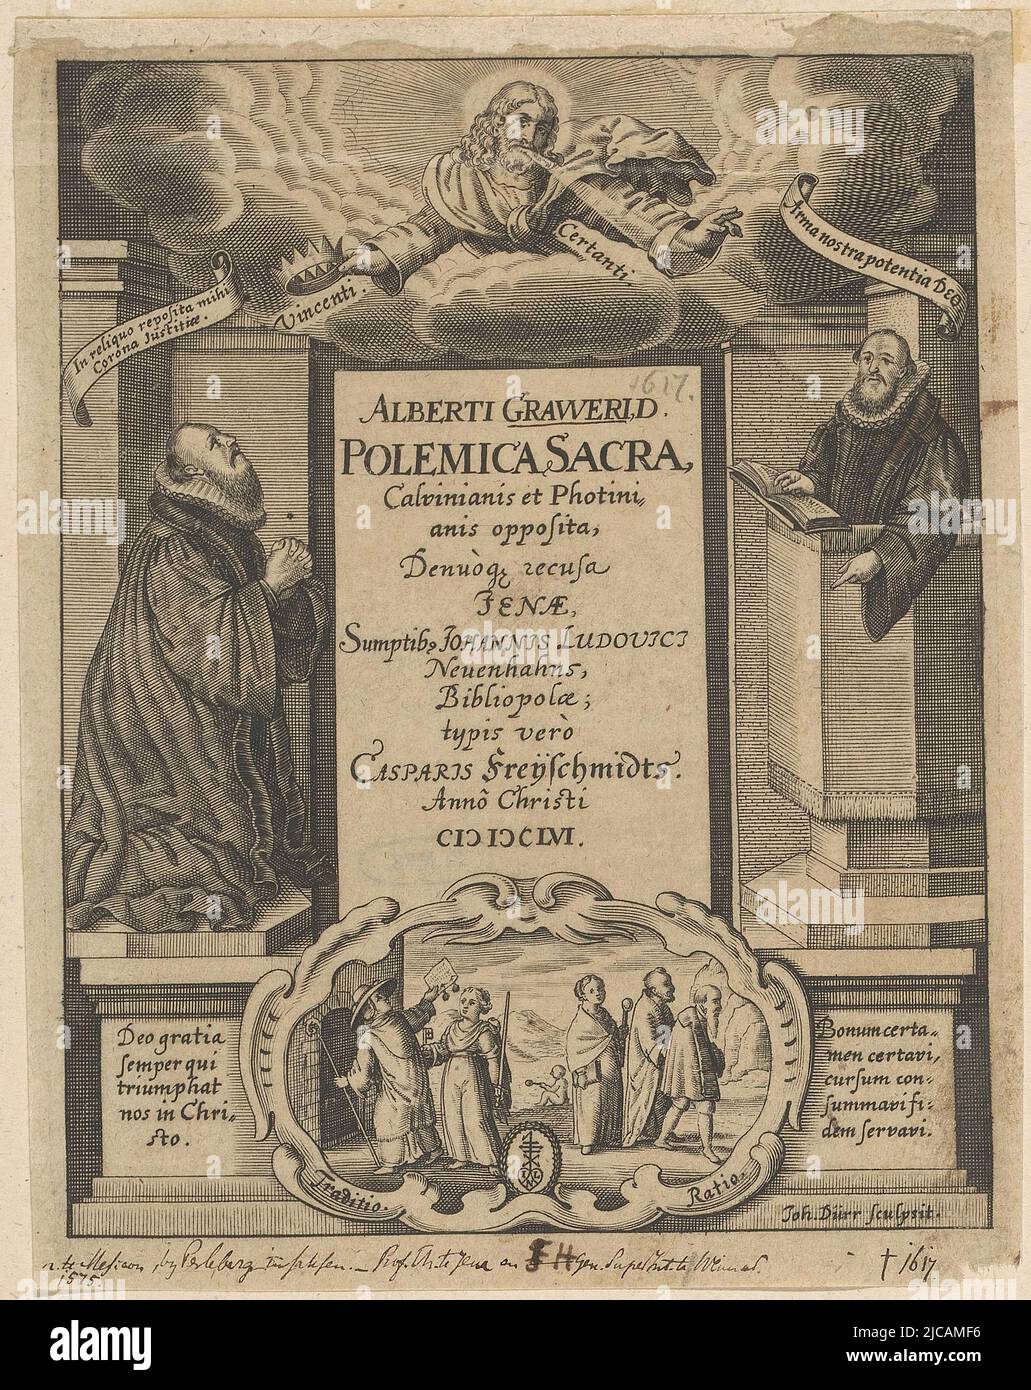 Allegory of the Good Faith and Against the Trade in Indulgences Title page for: Albert Gawer, Polemica sacra, Calvinianis et Photinianis opposita, denuoque recusa, 1656 , print maker: Johann Dürr, (mentioned on object), publisher: Johann Ludwig Neuenhahn, (mentioned on object), print maker: Germany, publisher: Jena, 1656, paper, engraving, h 175 mm - w 135 mm Stock Photo